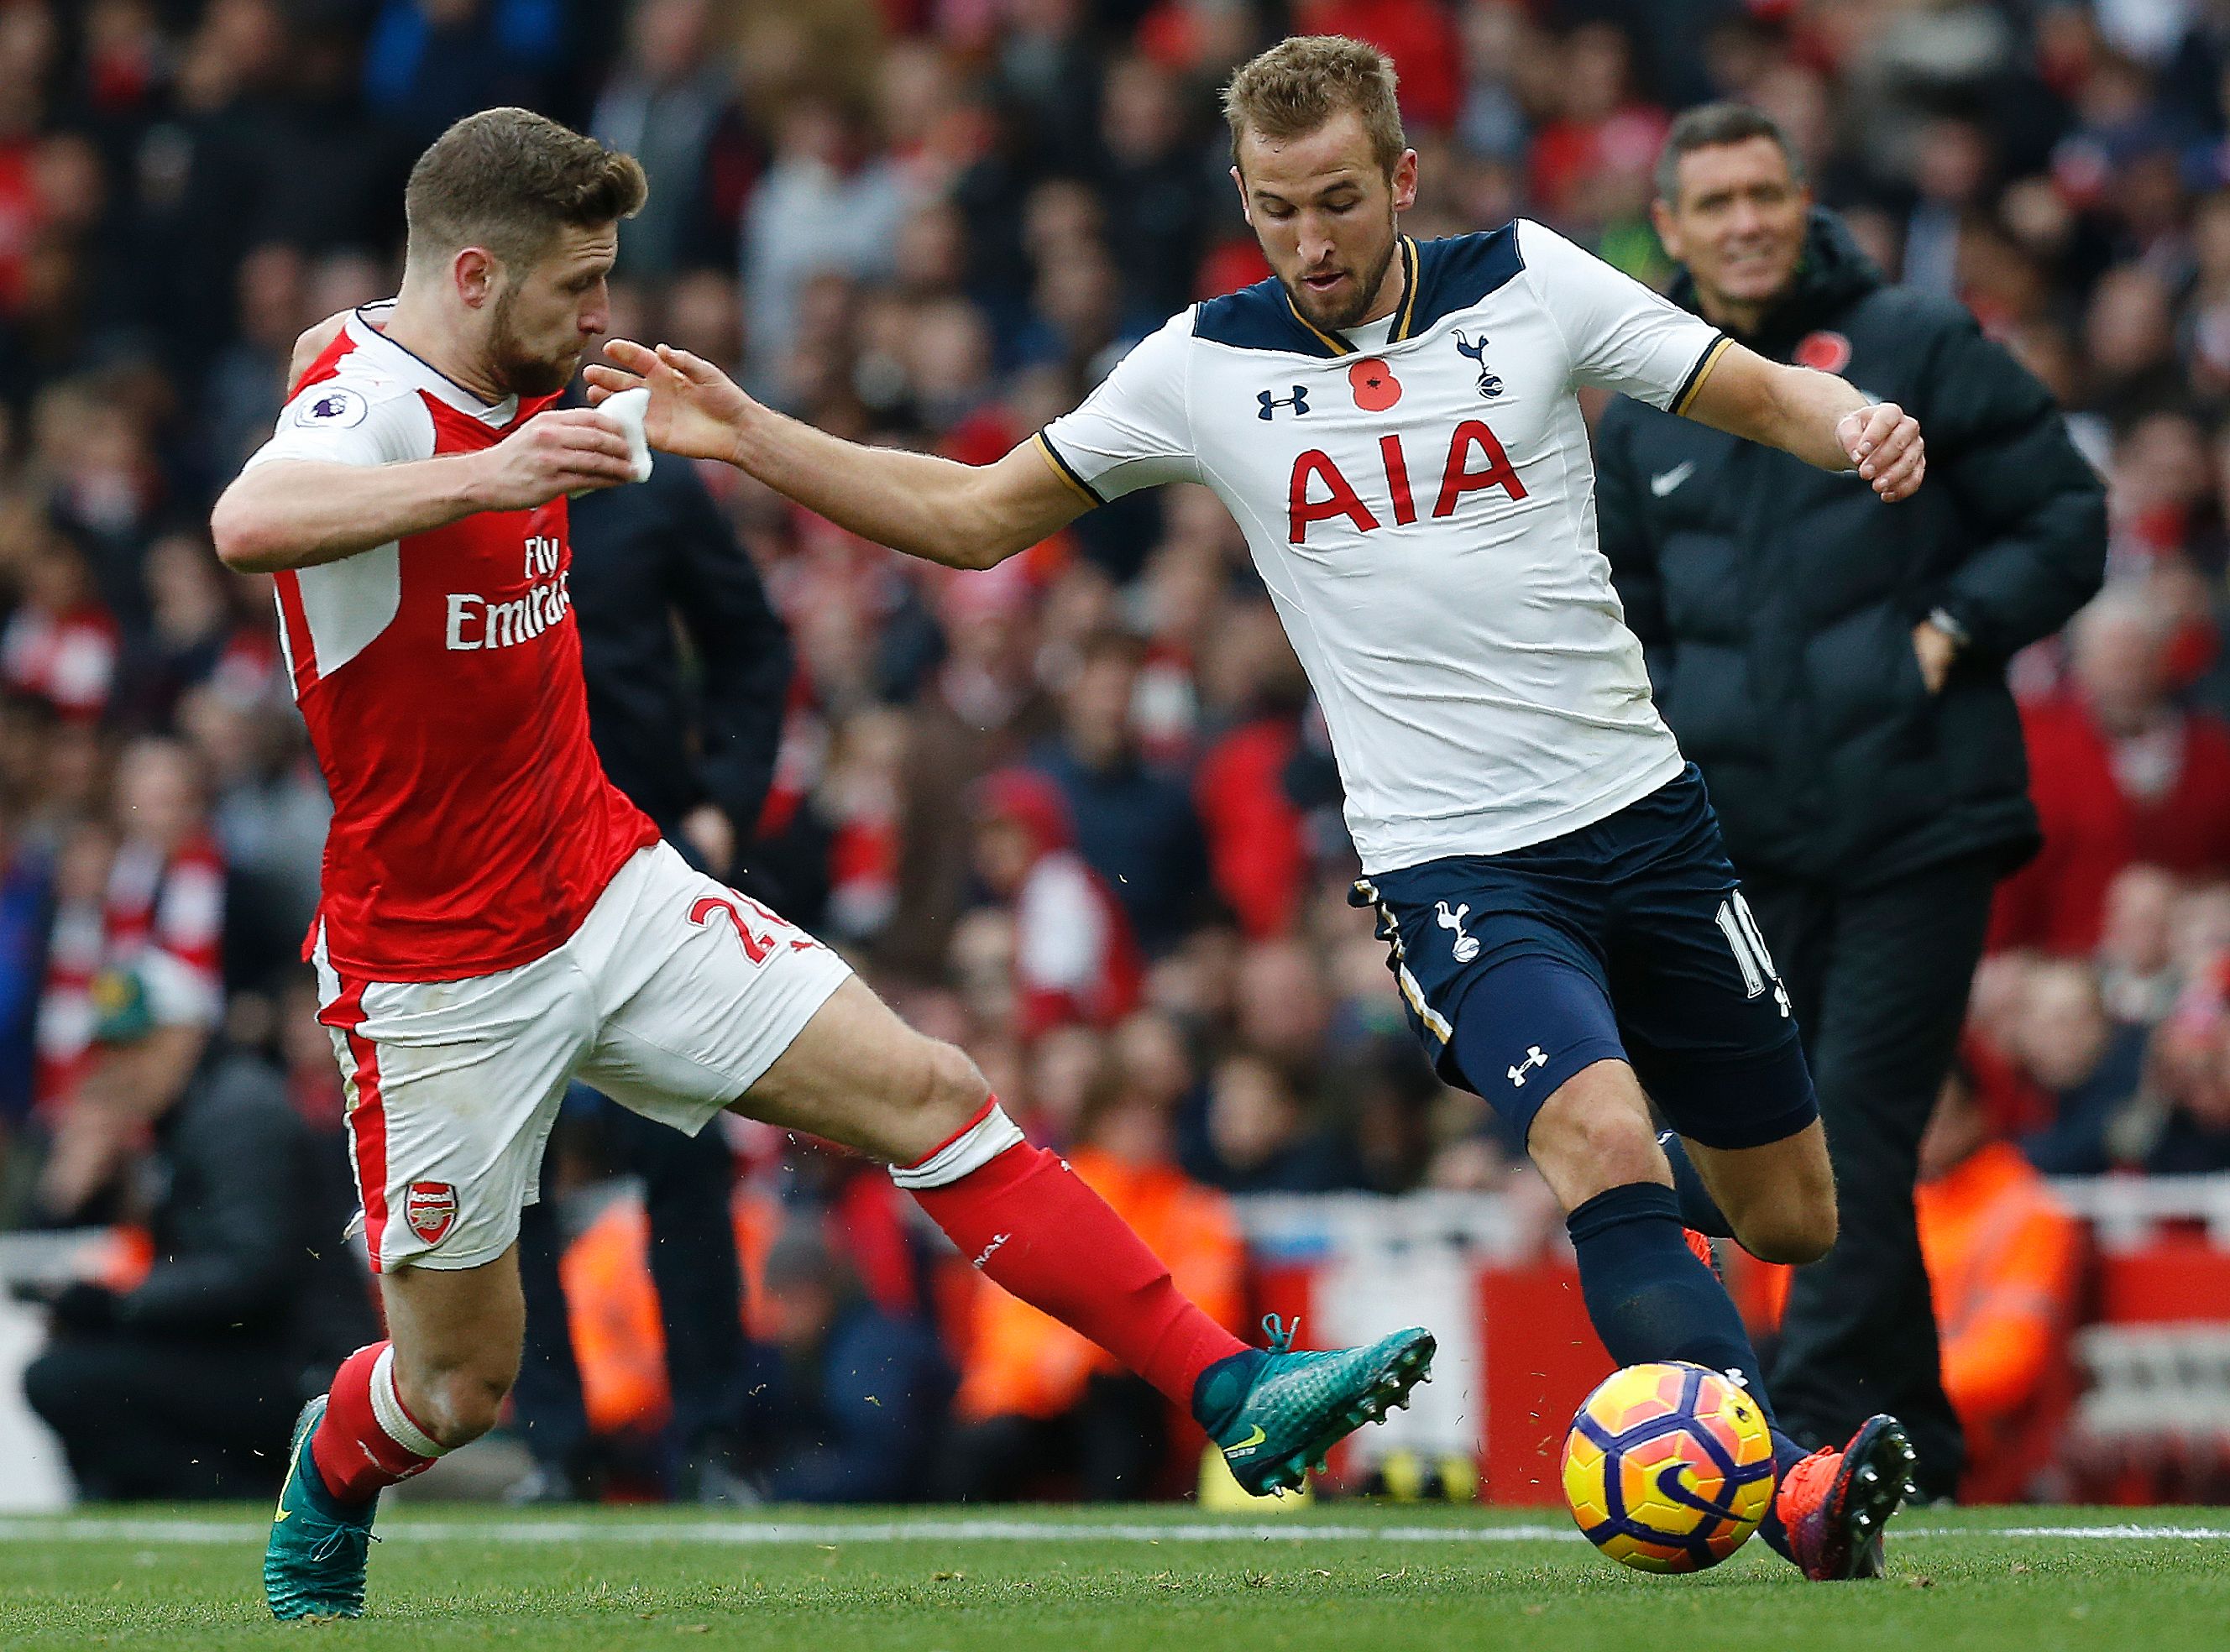 Arsenal's German defender Shkodran Mustafi (L) vies with Tottenham Hotspur's English striker Harry Kane during the English Premier League football match between Arsenal and Tottenham Hotspur at the Emirates Stadium in London on November 6, 2016.  / AFP / IKIMAGES / RESTRICTED TO EDITORIAL USE. No use with unauthorized audio, video, data, fixture lists, club/league logos or 'live' services. Online in-match use limited to 45 images, no video emulation. No use in betting, games or single club/league/player publications.        (Photo credit should read IKIMAGES/AFP/Getty Images)